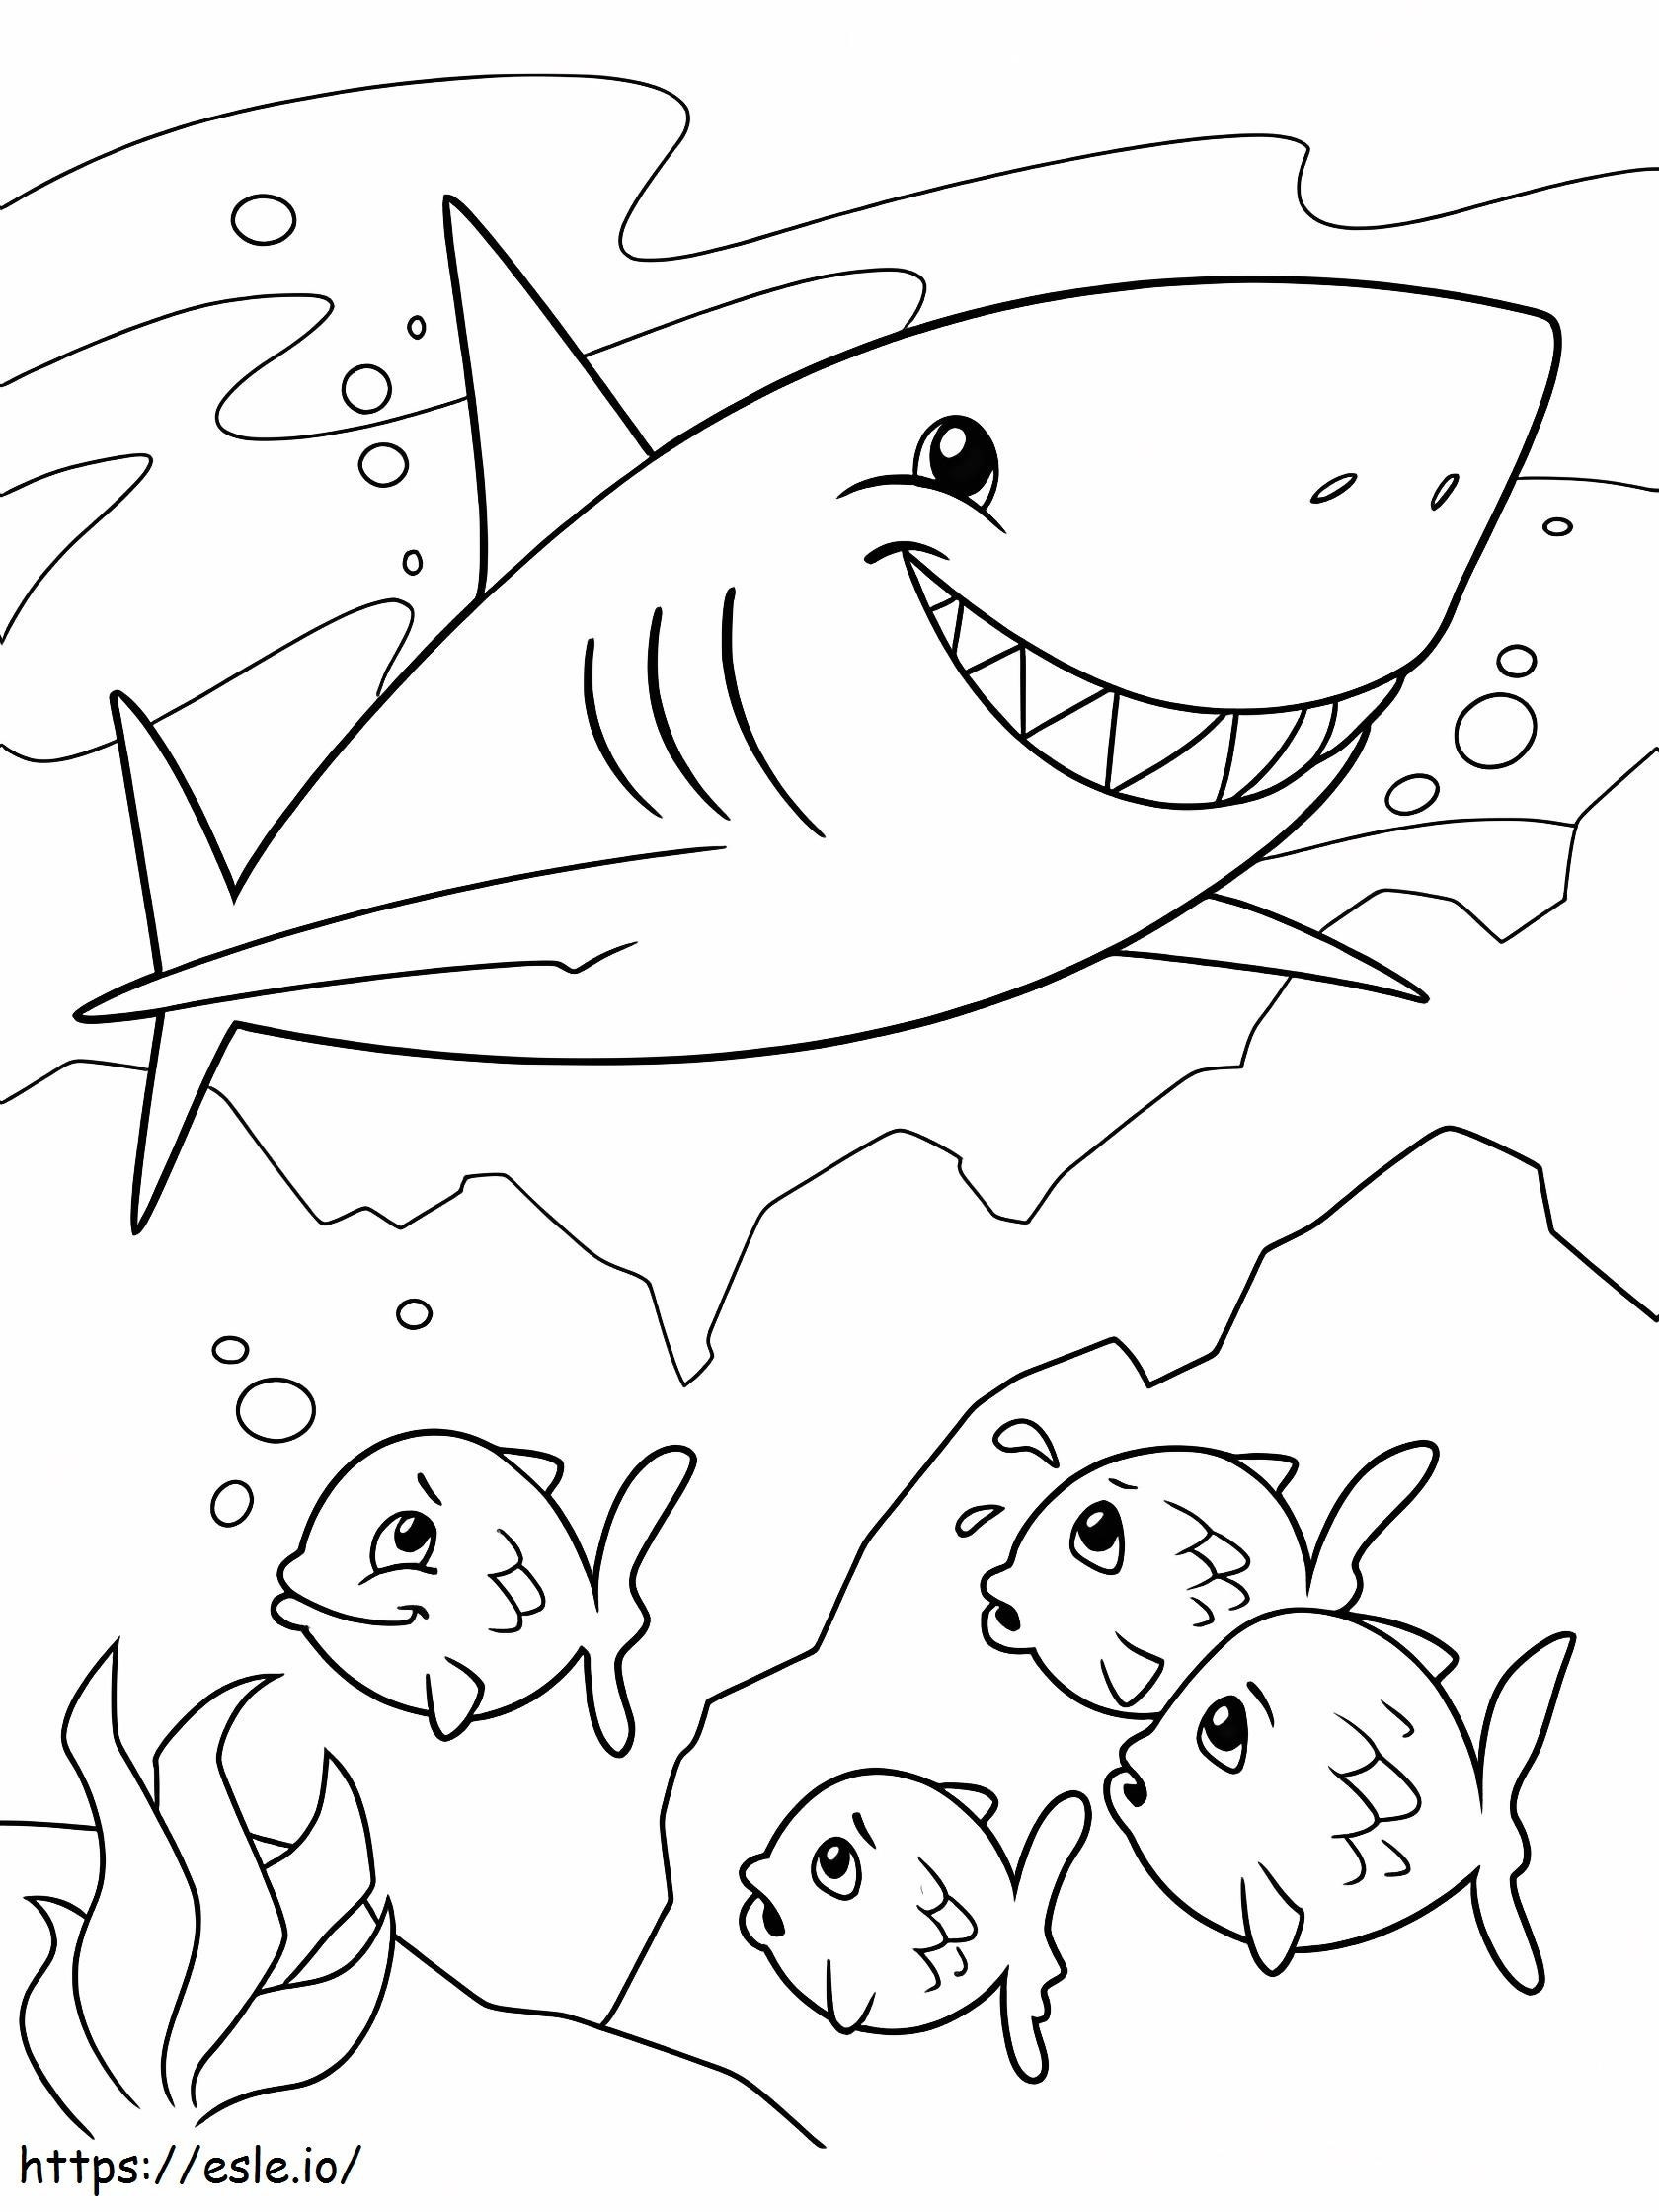 Shark With Four Fishes coloring page